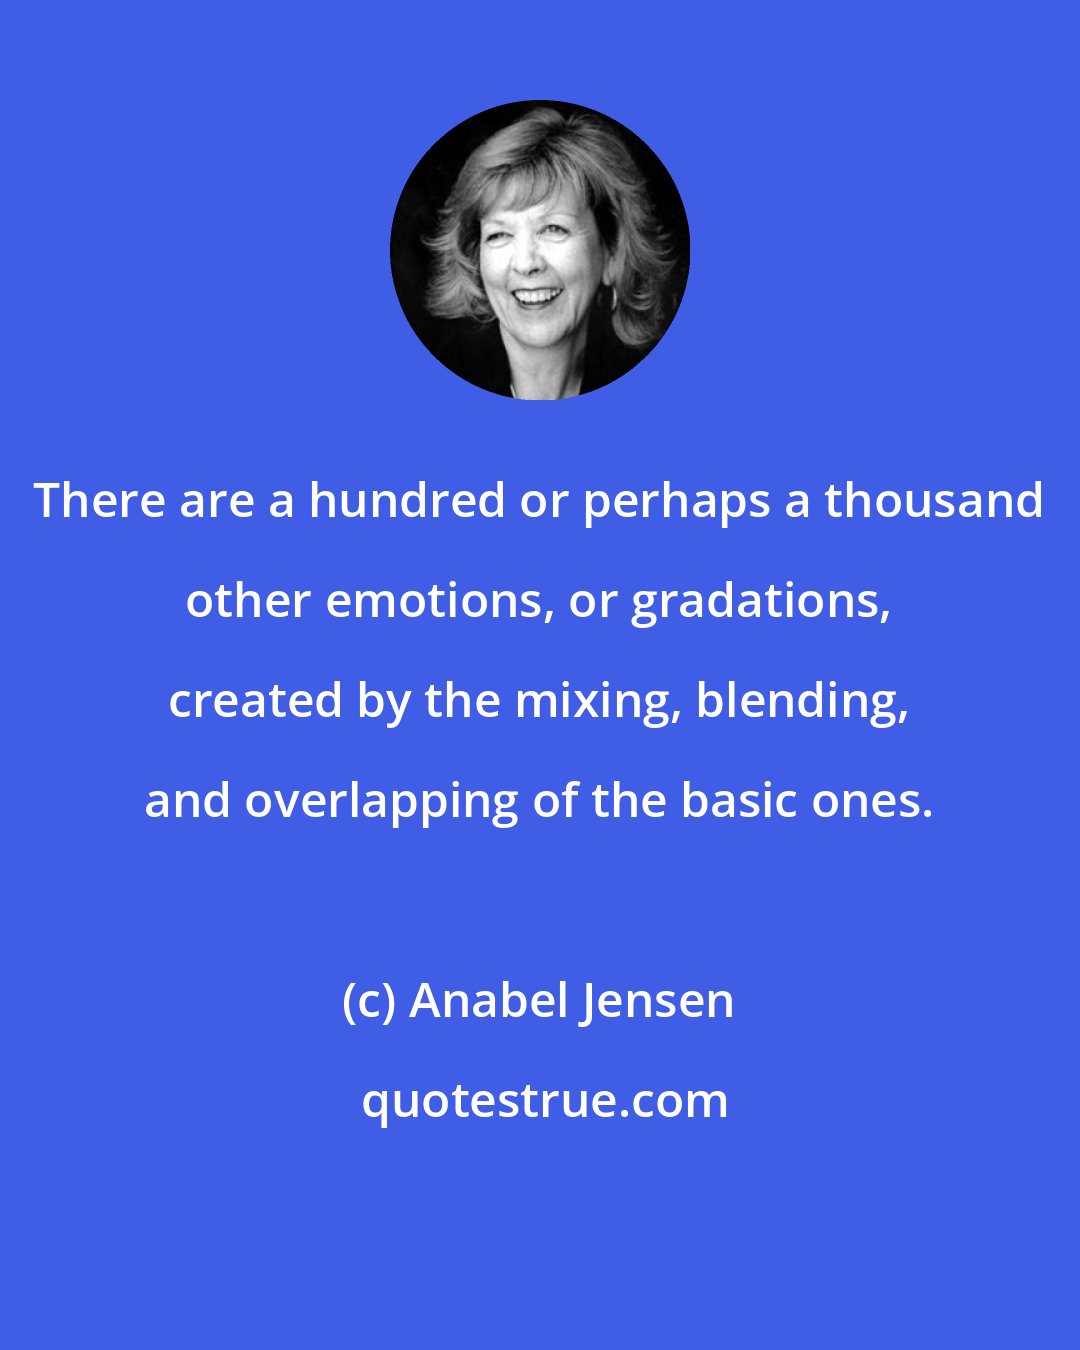 Anabel Jensen: There are a hundred or perhaps a thousand other emotions, or gradations, created by the mixing, blending, and overlapping of the basic ones.